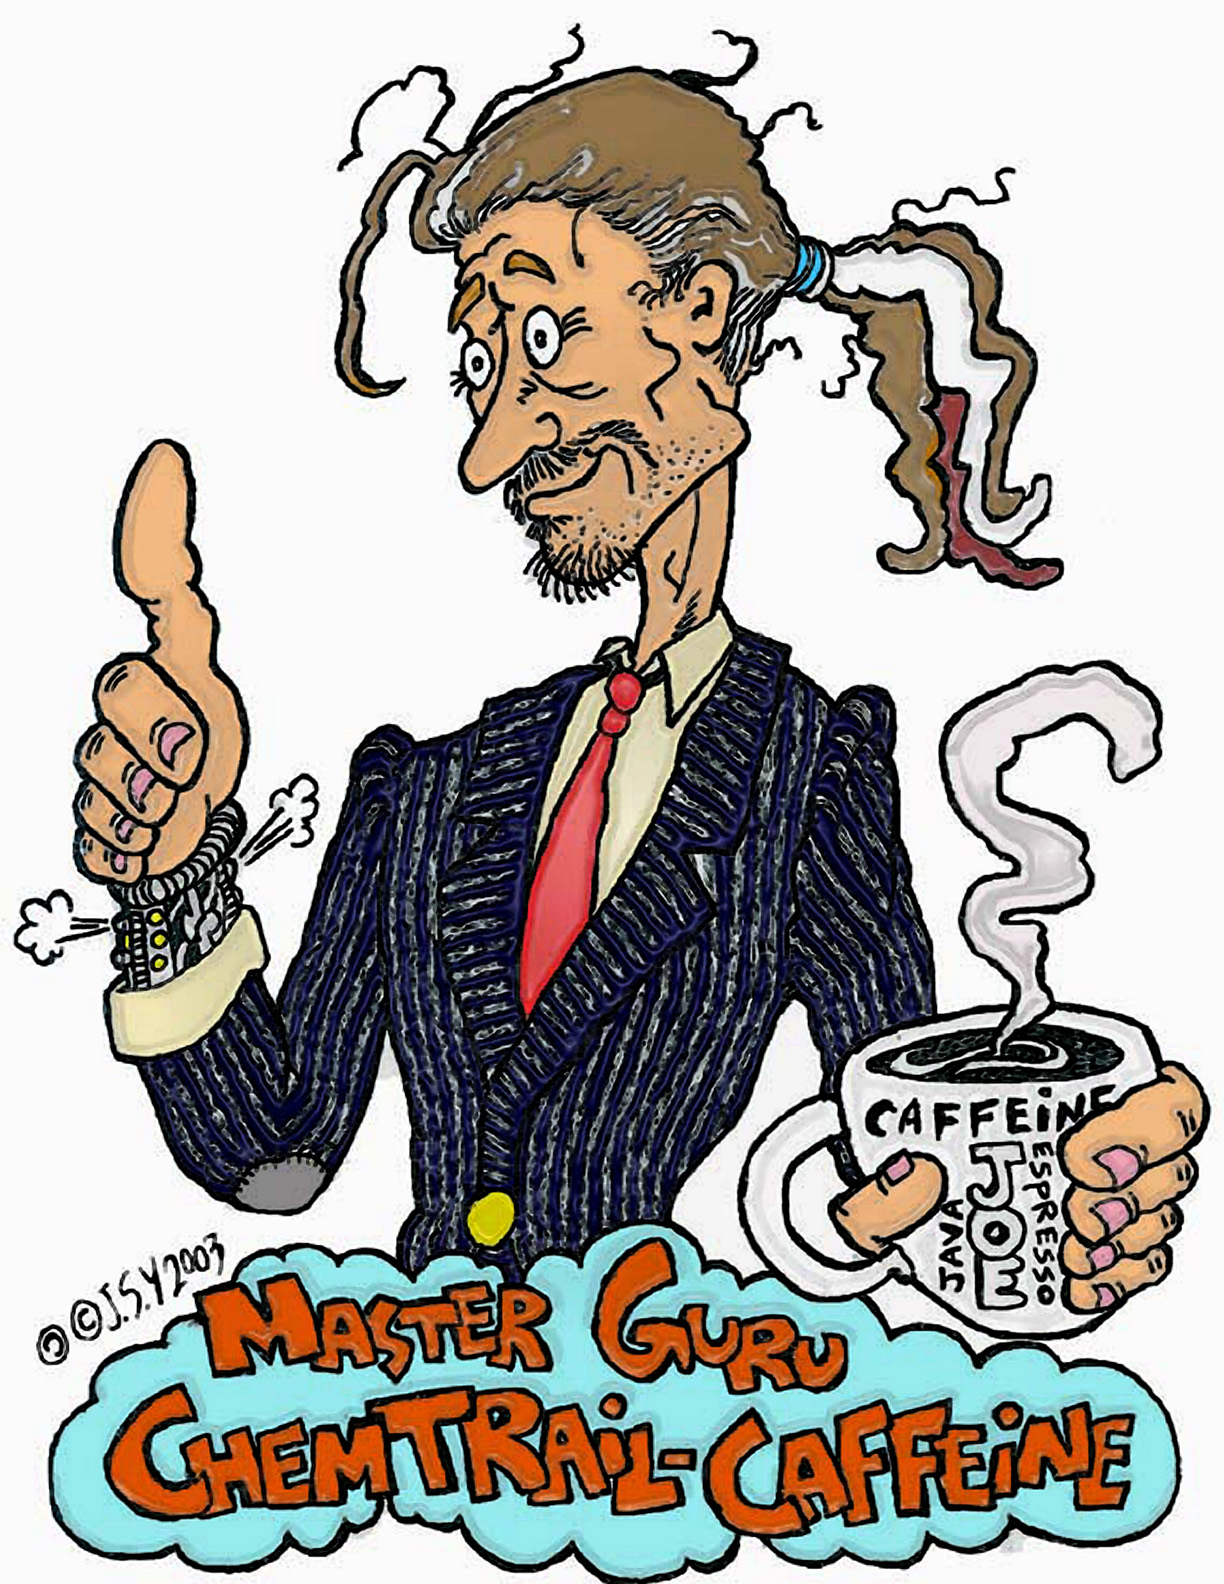 Specialty: chemtrail conspiracy paranoia and coffee connoisseur...